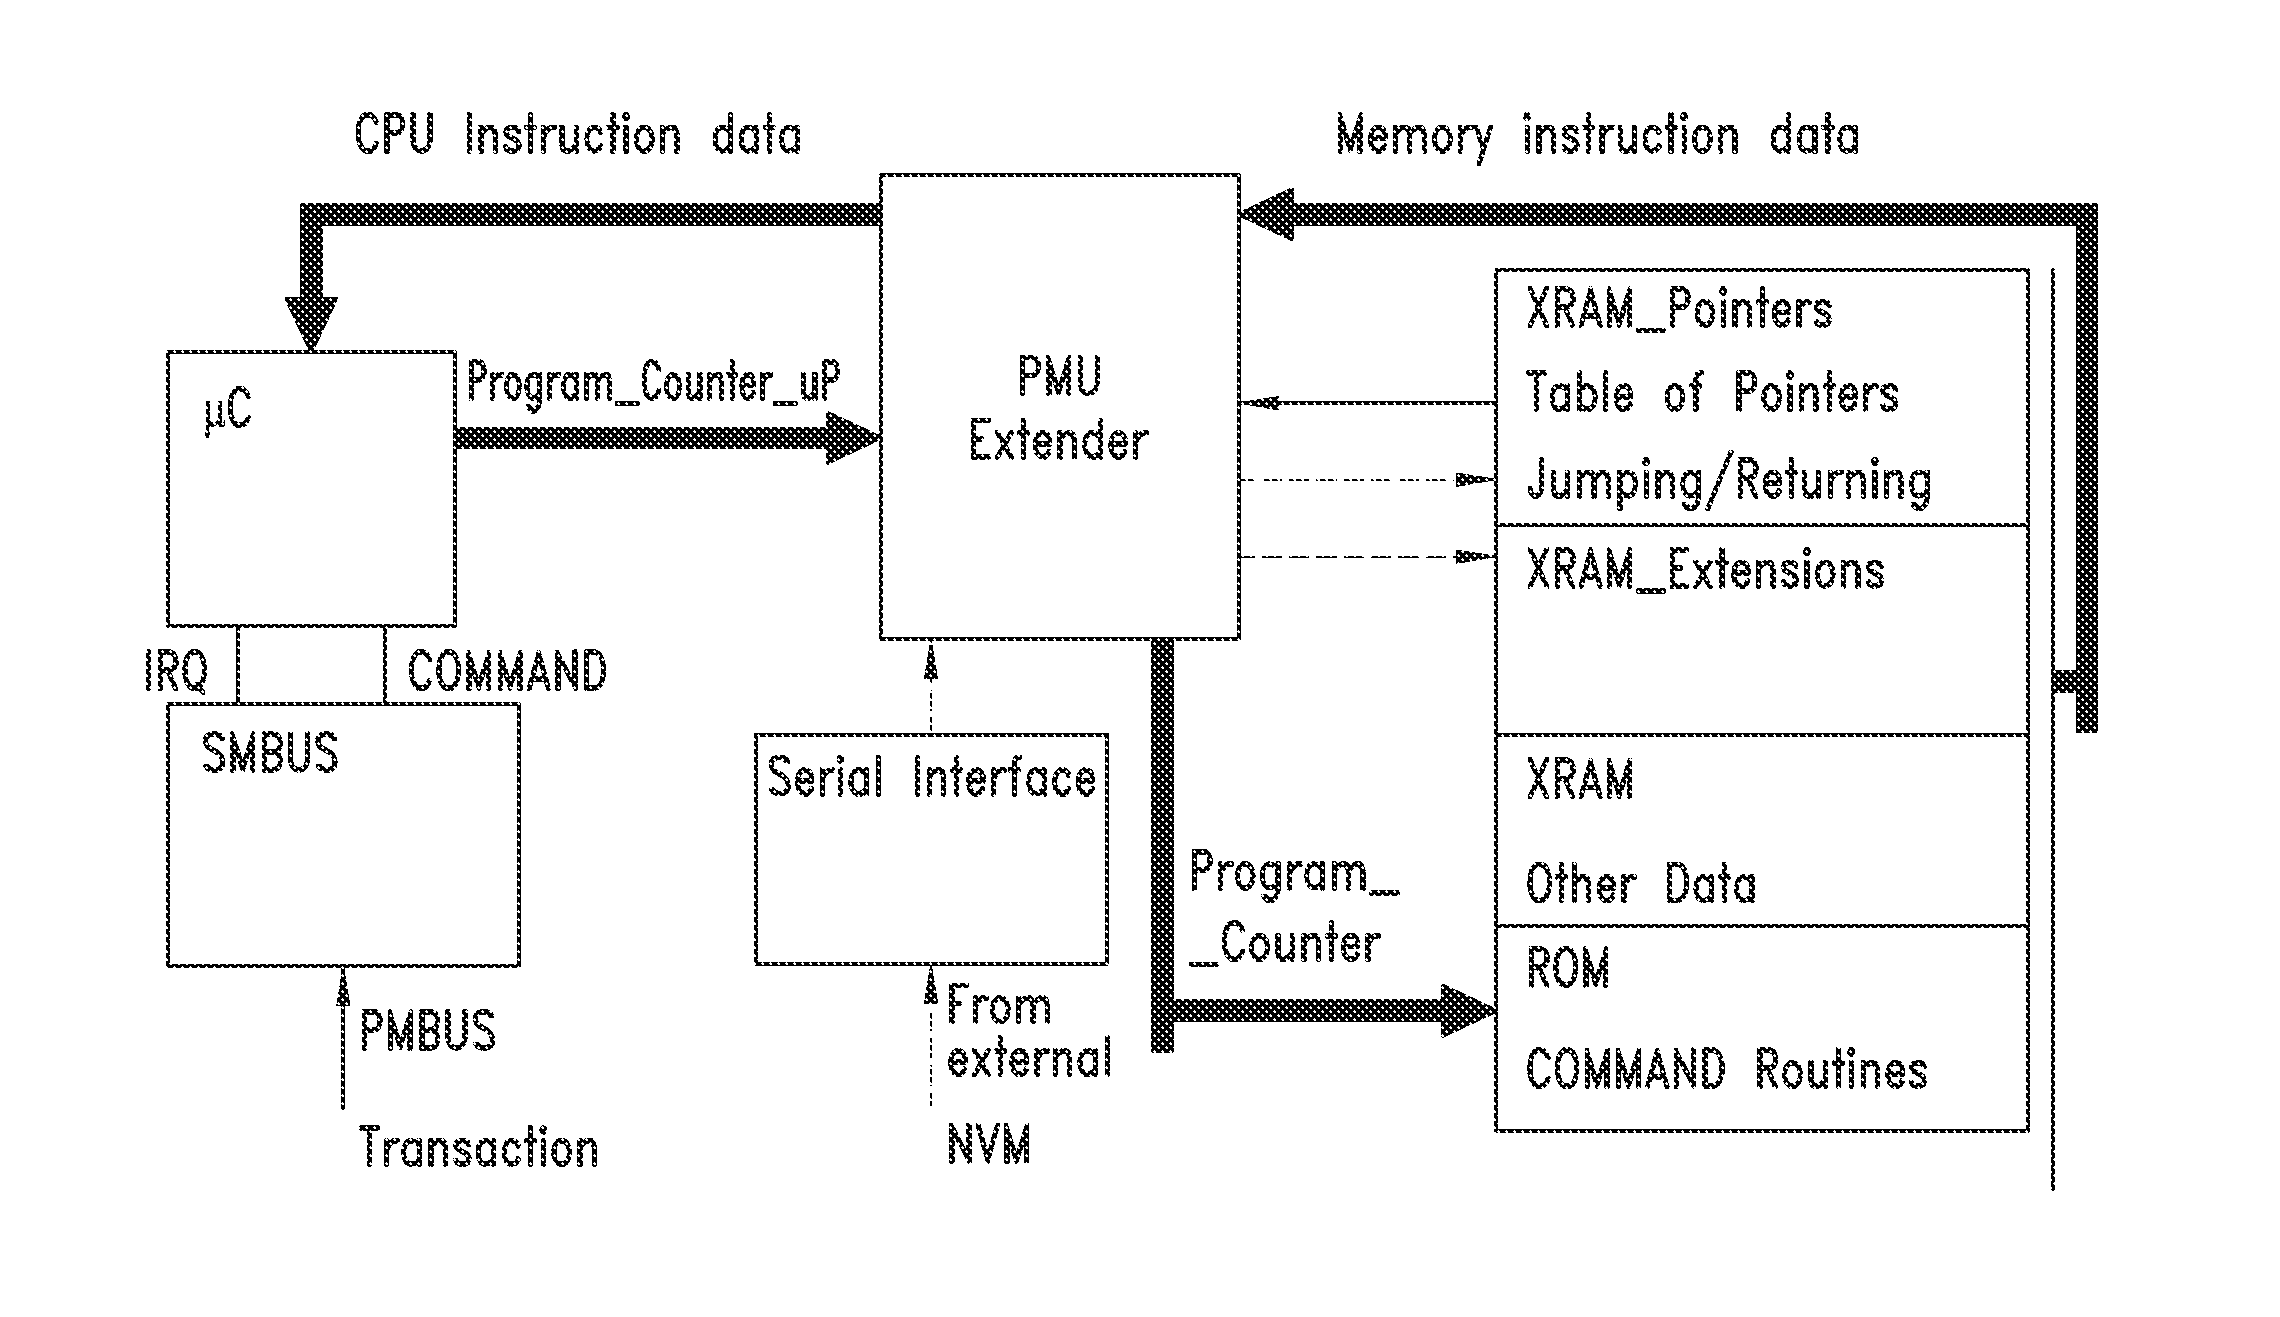 Power management architecture based on micro/processor architecture with embedded and external nvm